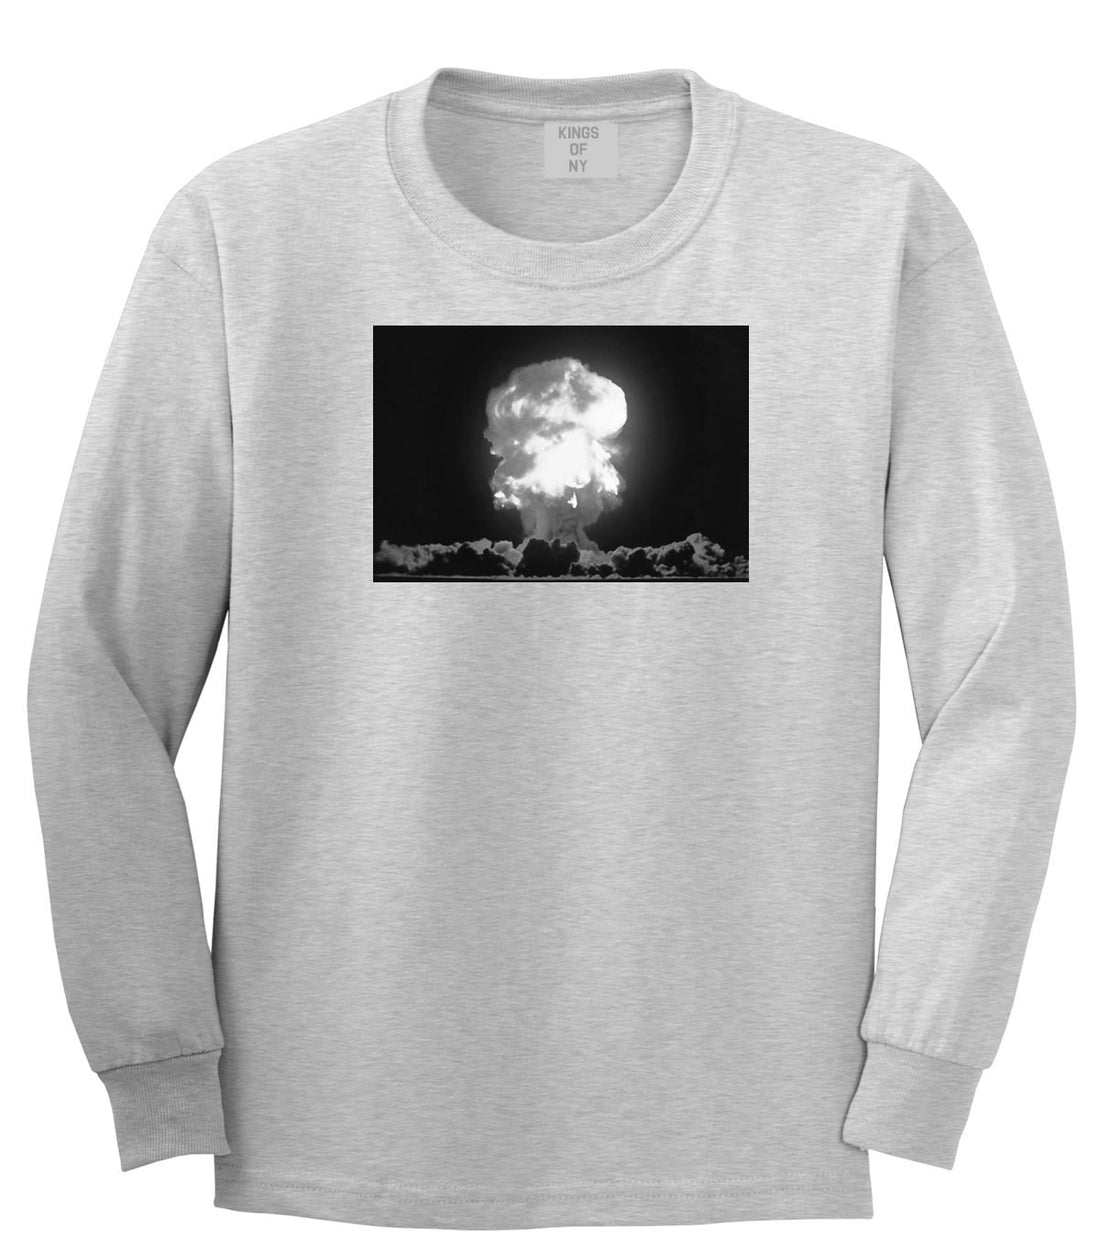 Explosion Nuclear Bomb Cloud Long Sleeve T-Shirt in Grey By Kings Of NY